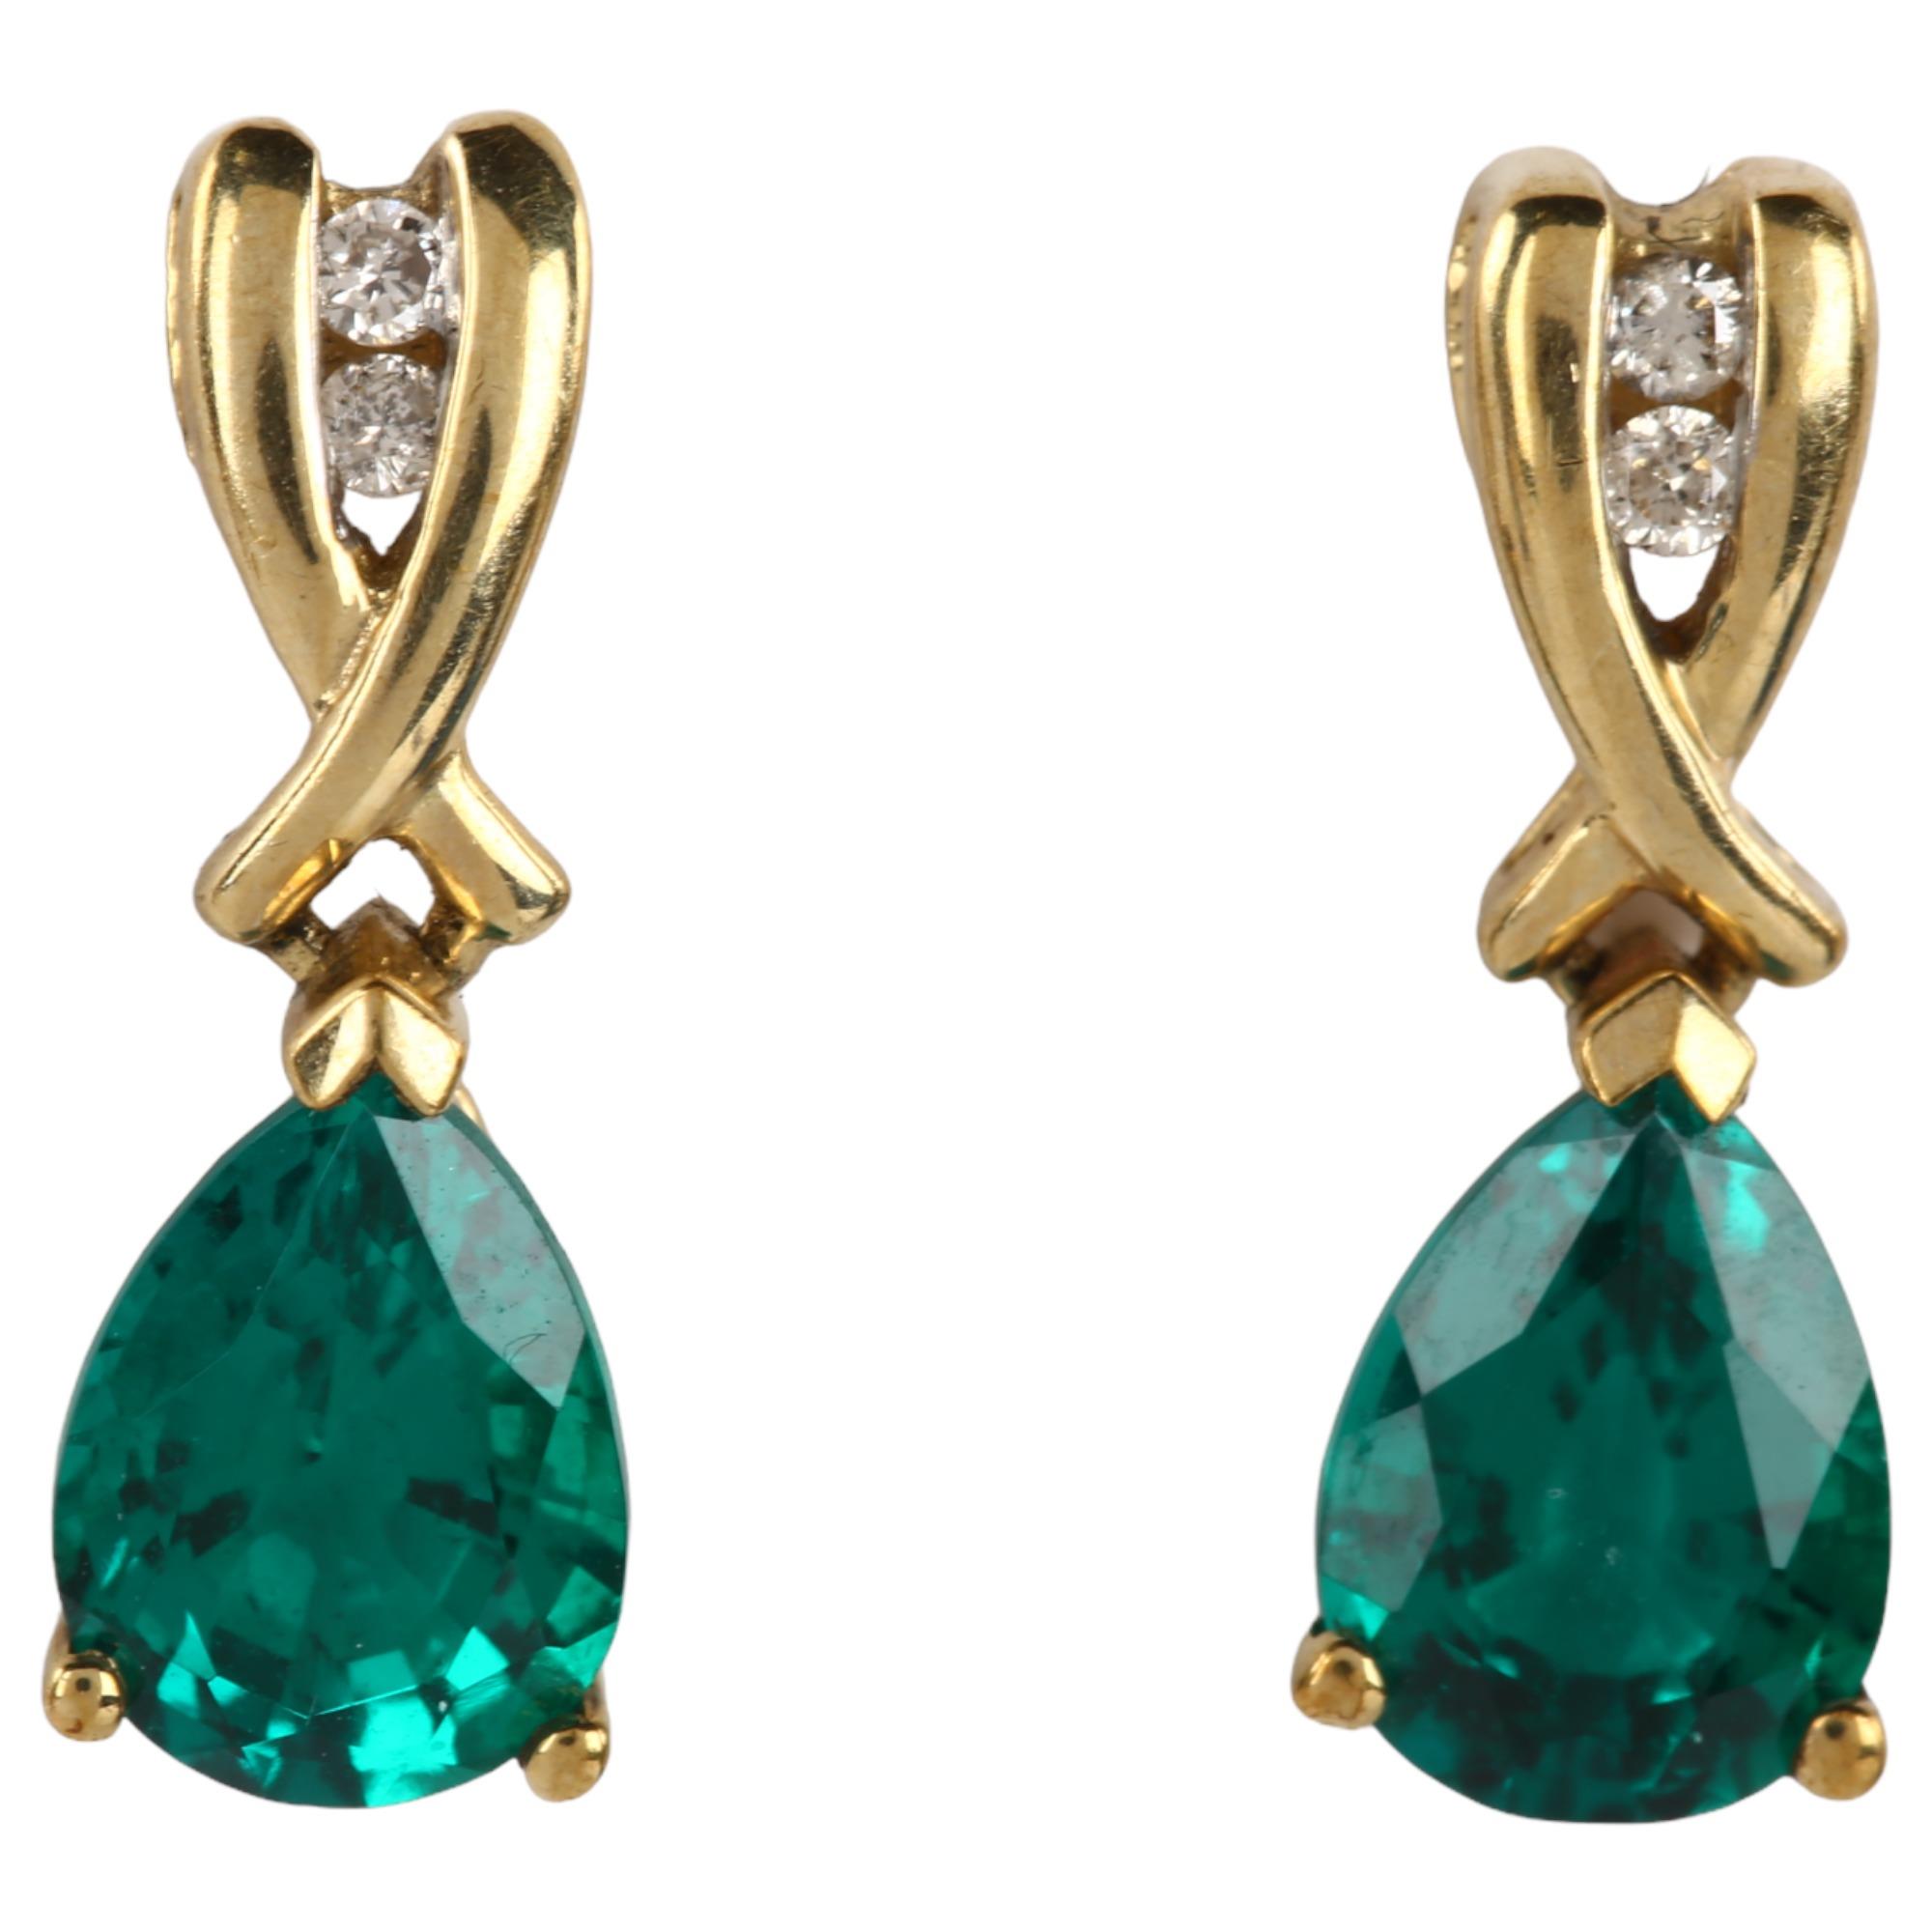 A pair of 9ct gold green quartz and diamond drop earrings, set with pear-cut quartz and modern round